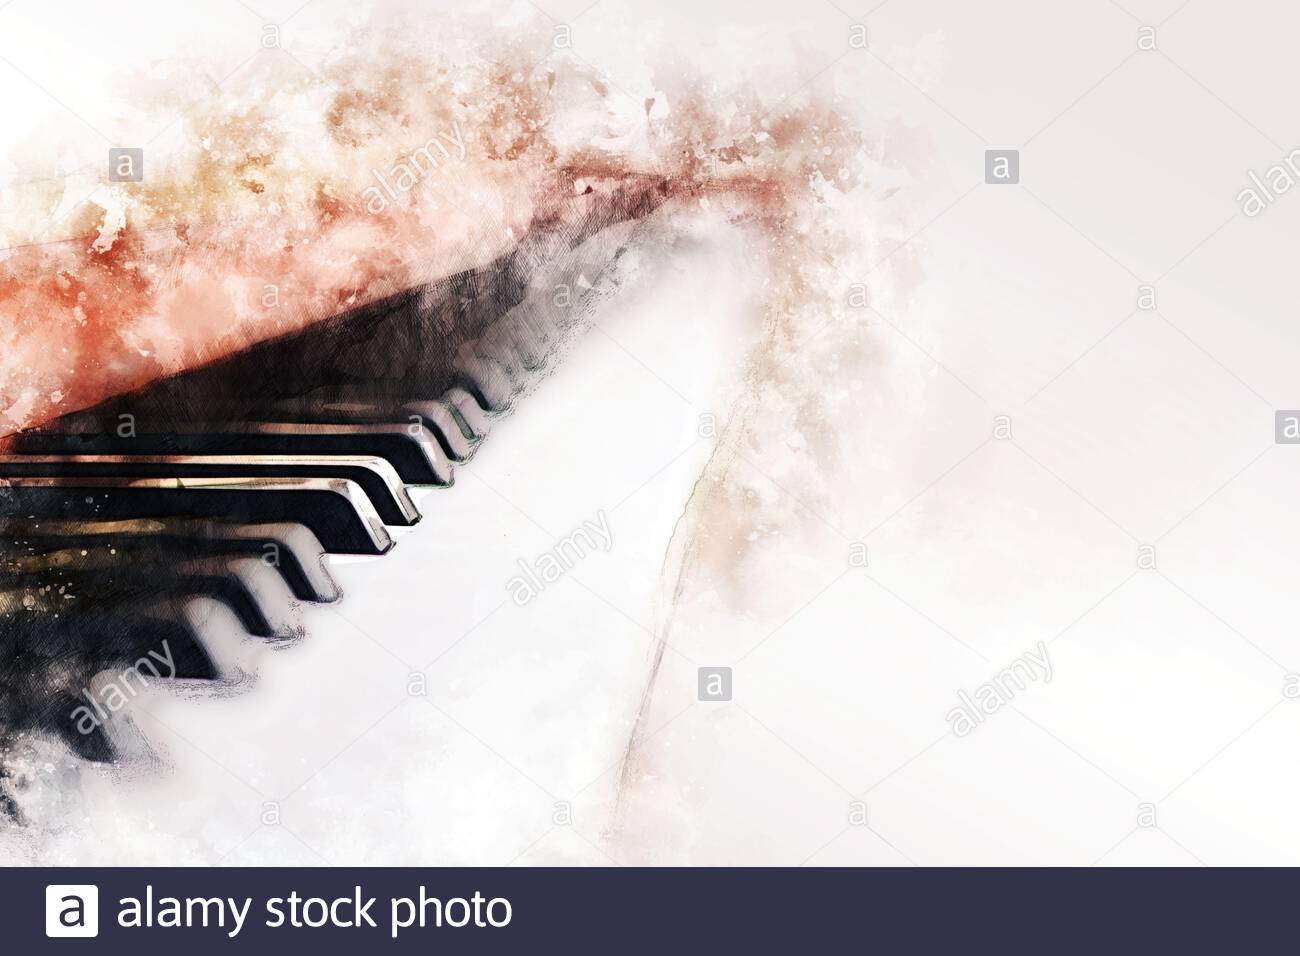 Abstract Colorful Piano Keyboard On Watercolor Illustration